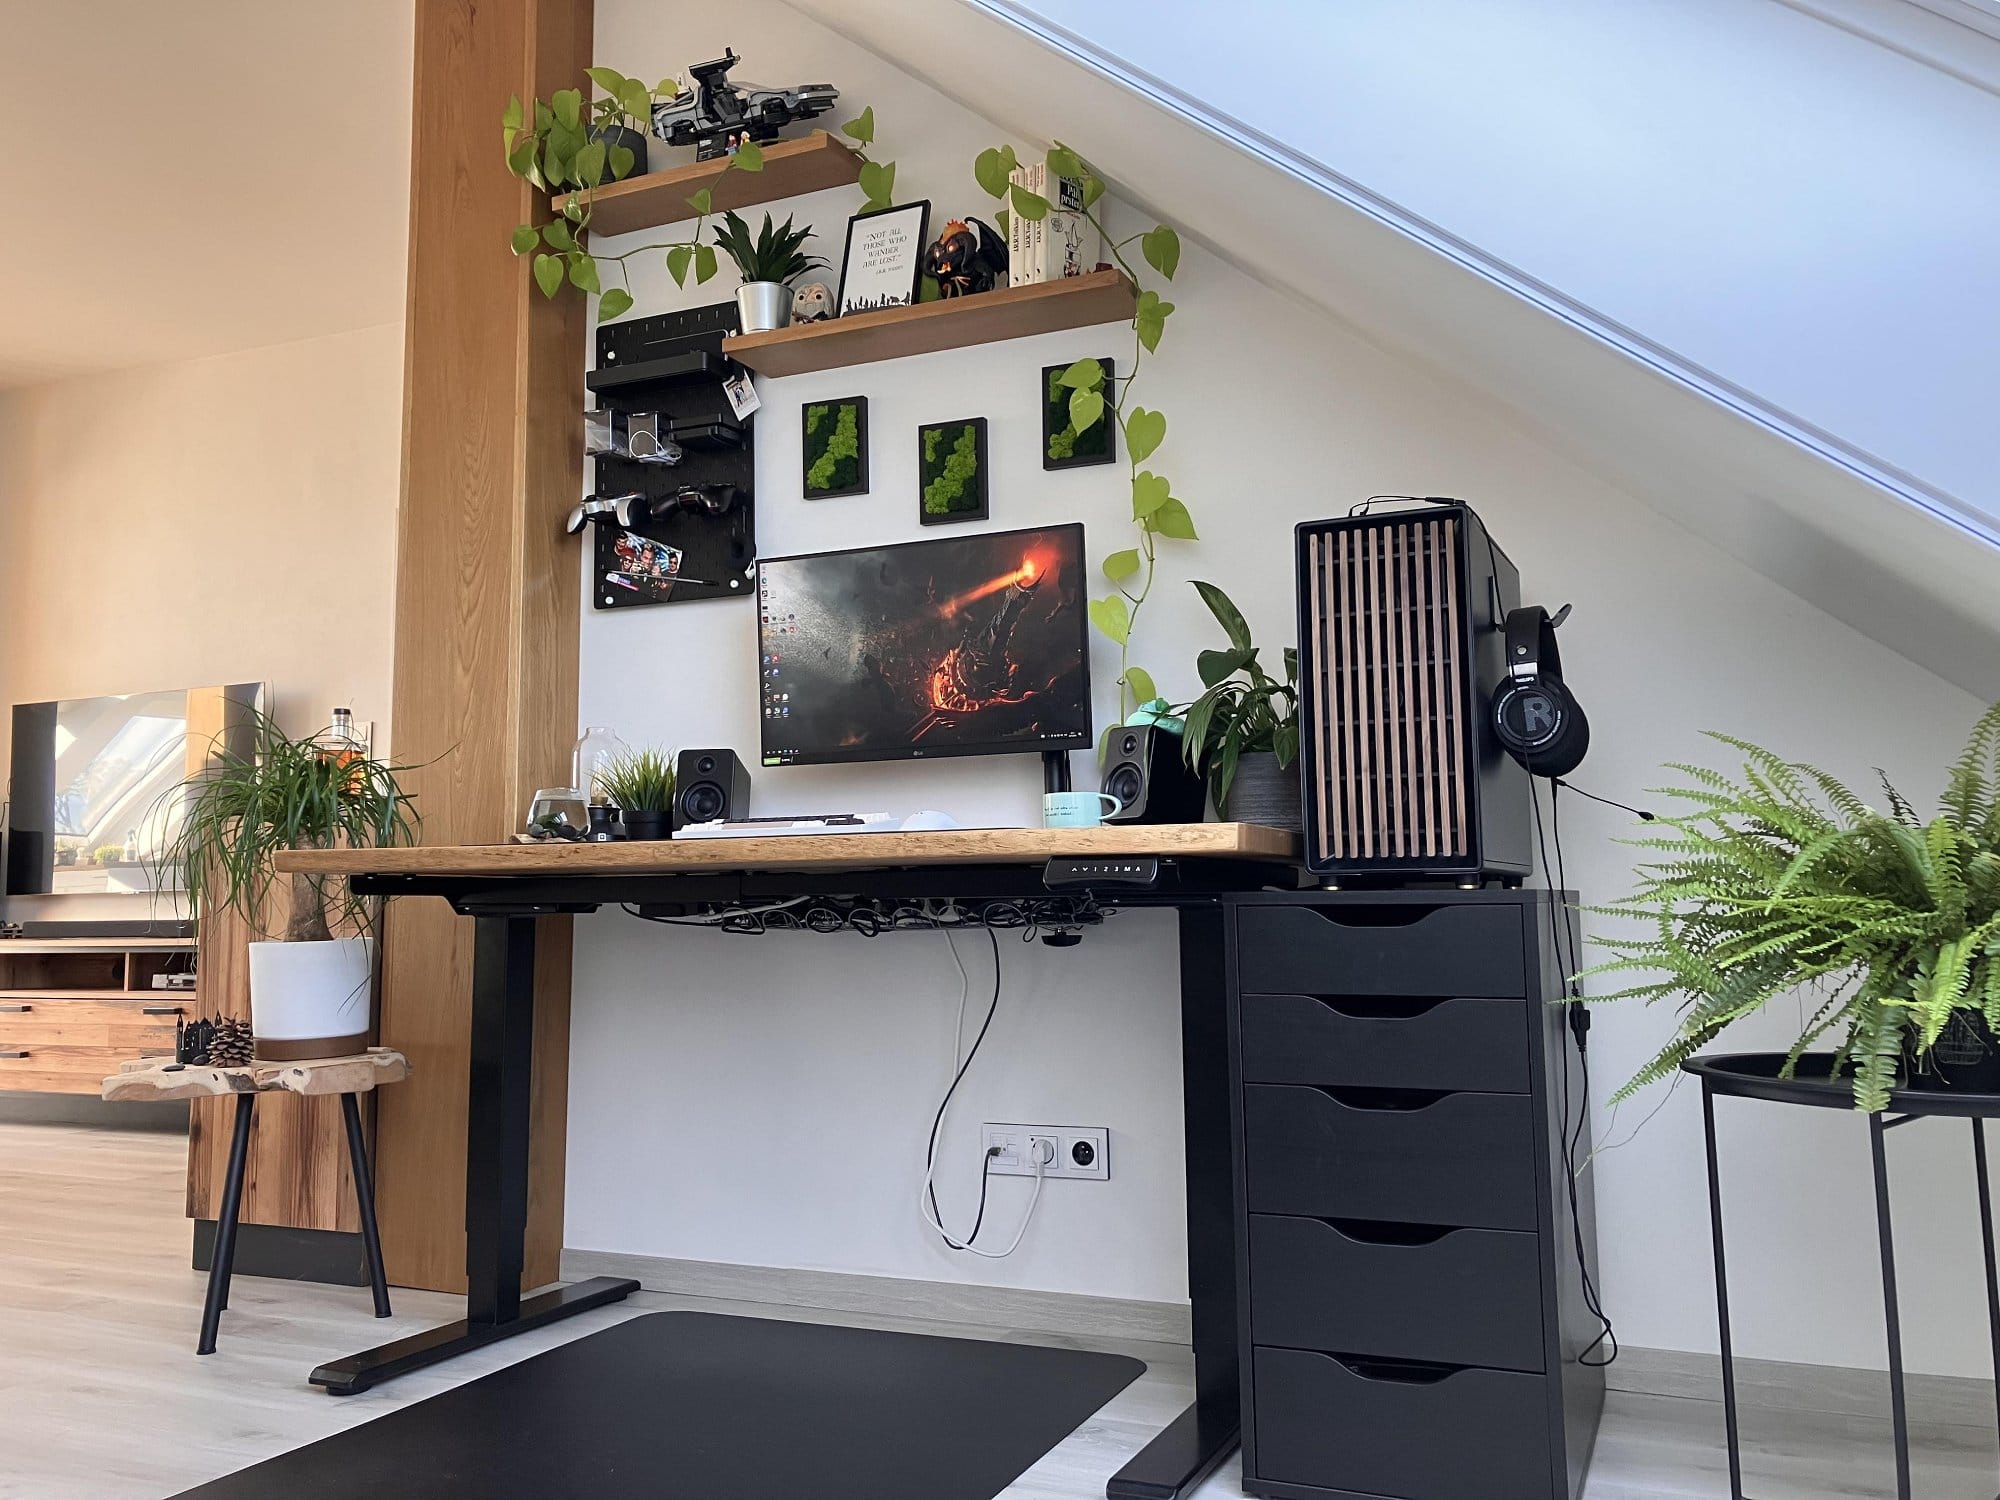 A modern home office setup featuring a wooden desk with a computer, ergonomic chair, shelves with plants and decor